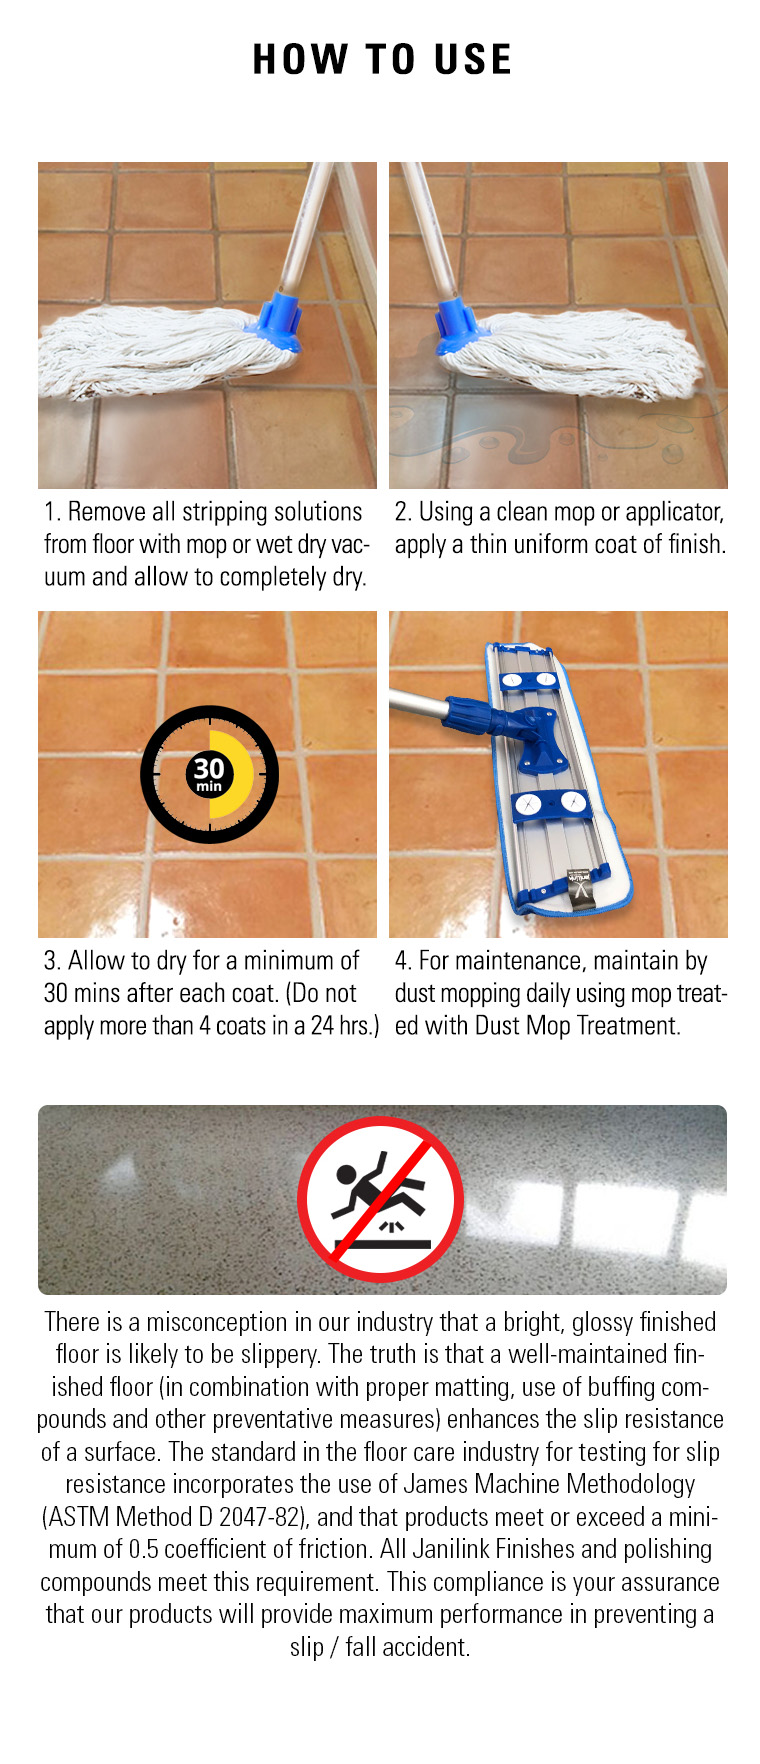 how to use, mop, wet dry vacuum, dust mop treatment, prevent slip fall accident.